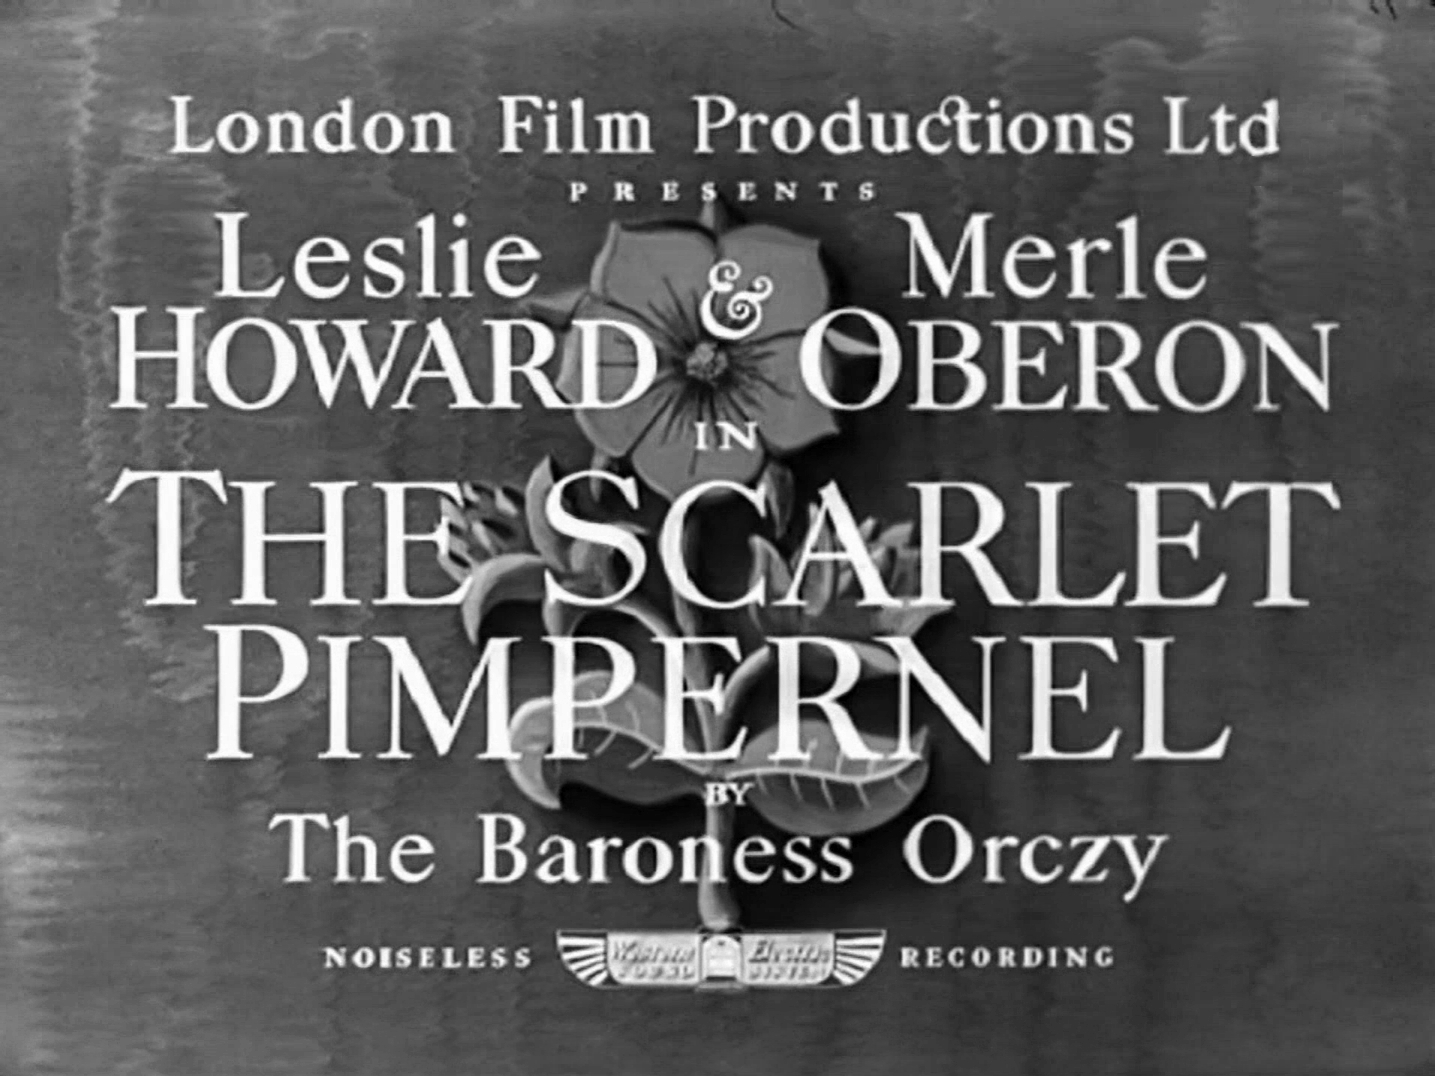 Main title from The Scarlet Pimpernel (1934) (2). By The Baroness Orczy